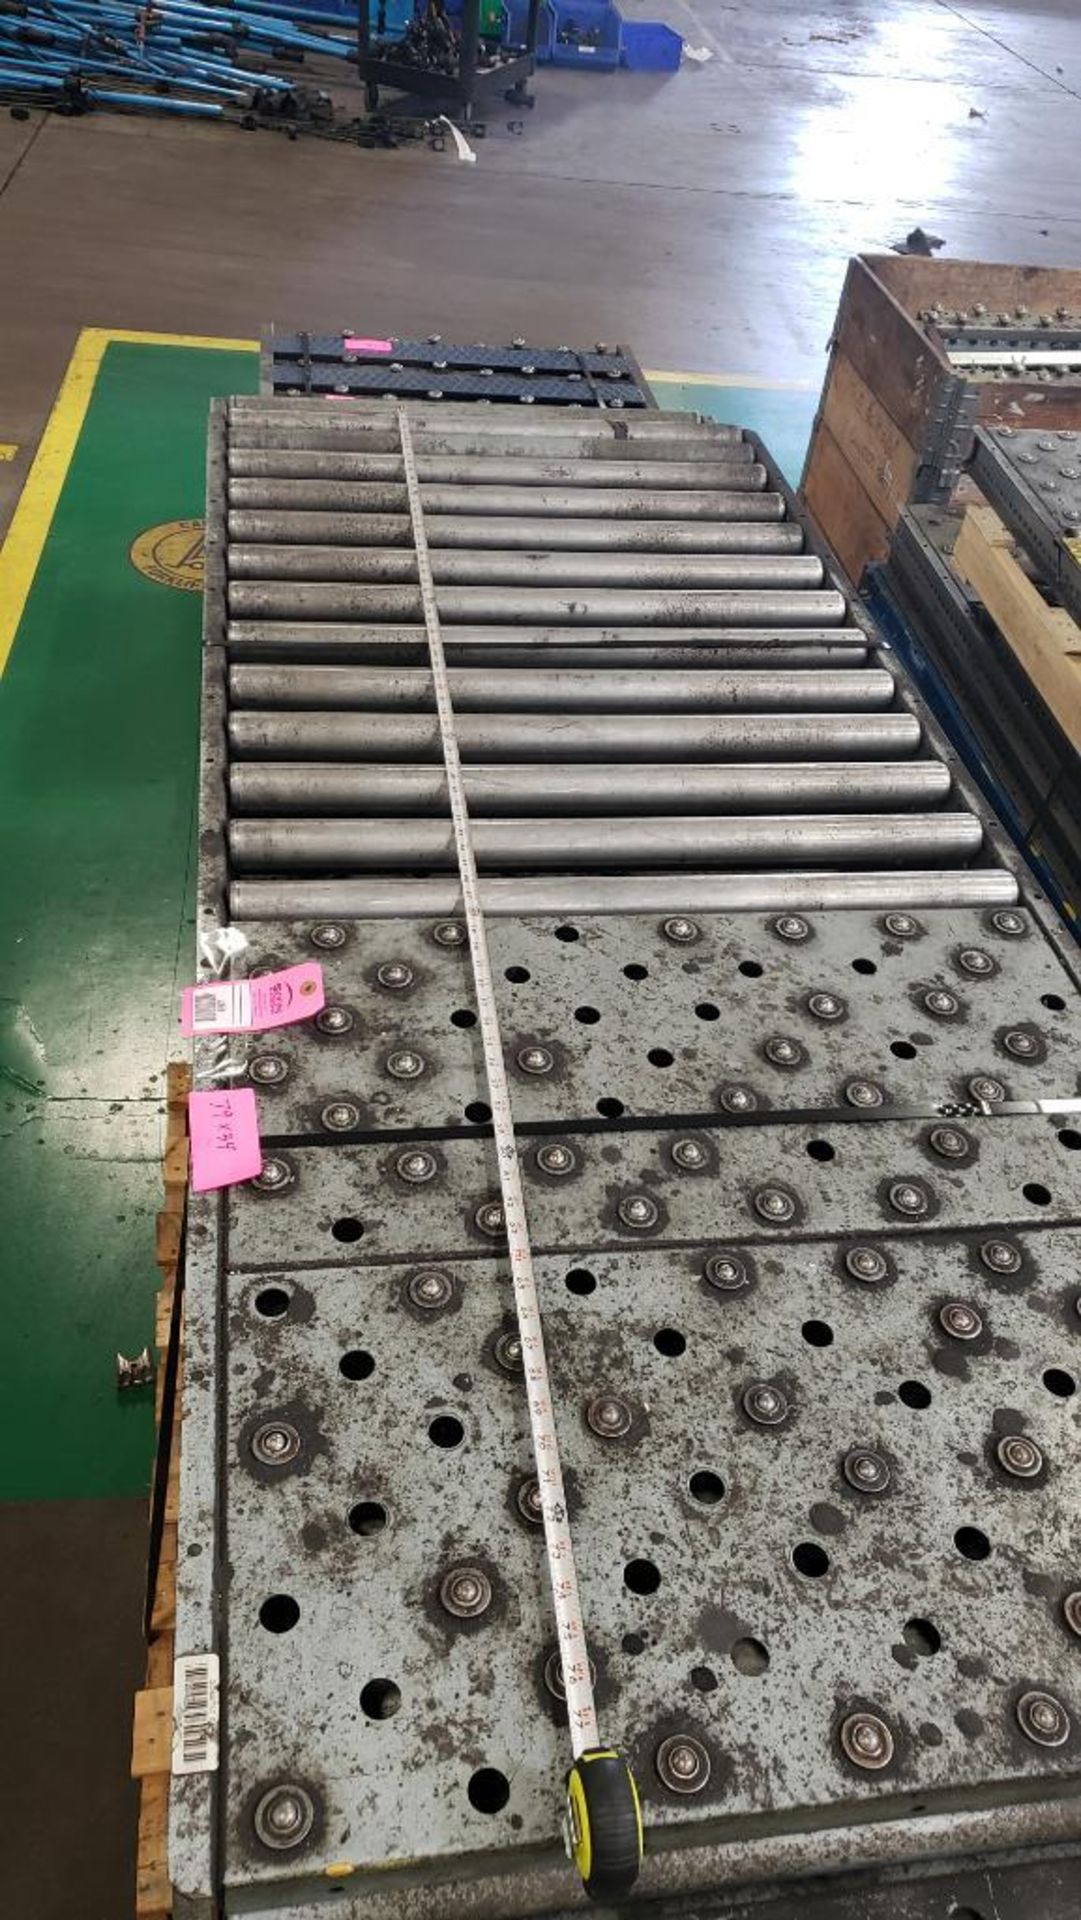 Qty 11 - Sections of roller conveyor. 34" W x 79" longest length. - Image 4 of 4